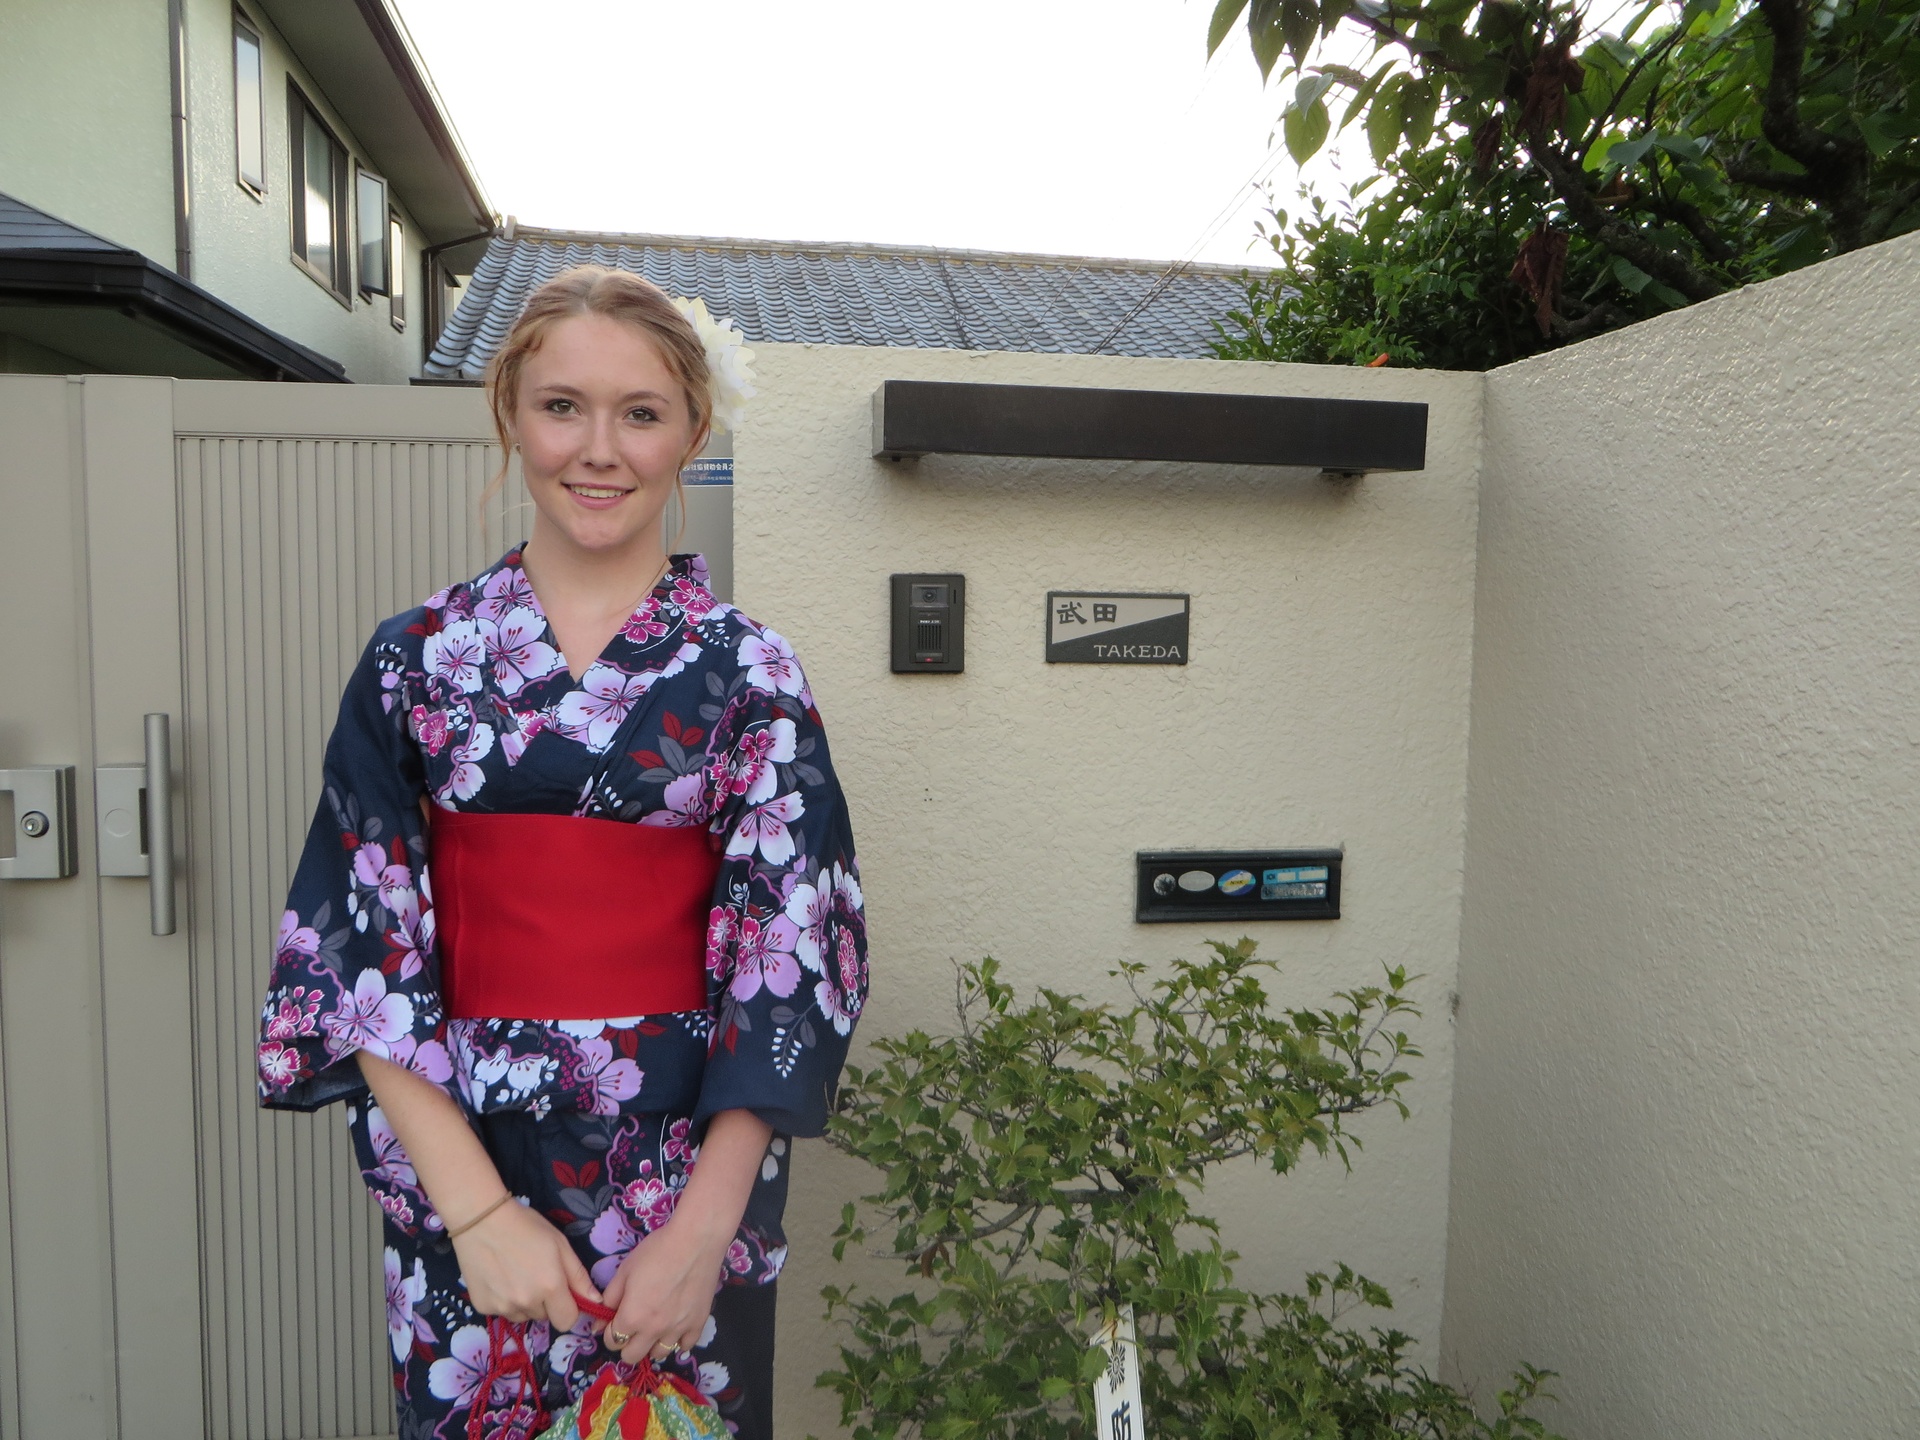 Student dressed up as a geisha in Japan